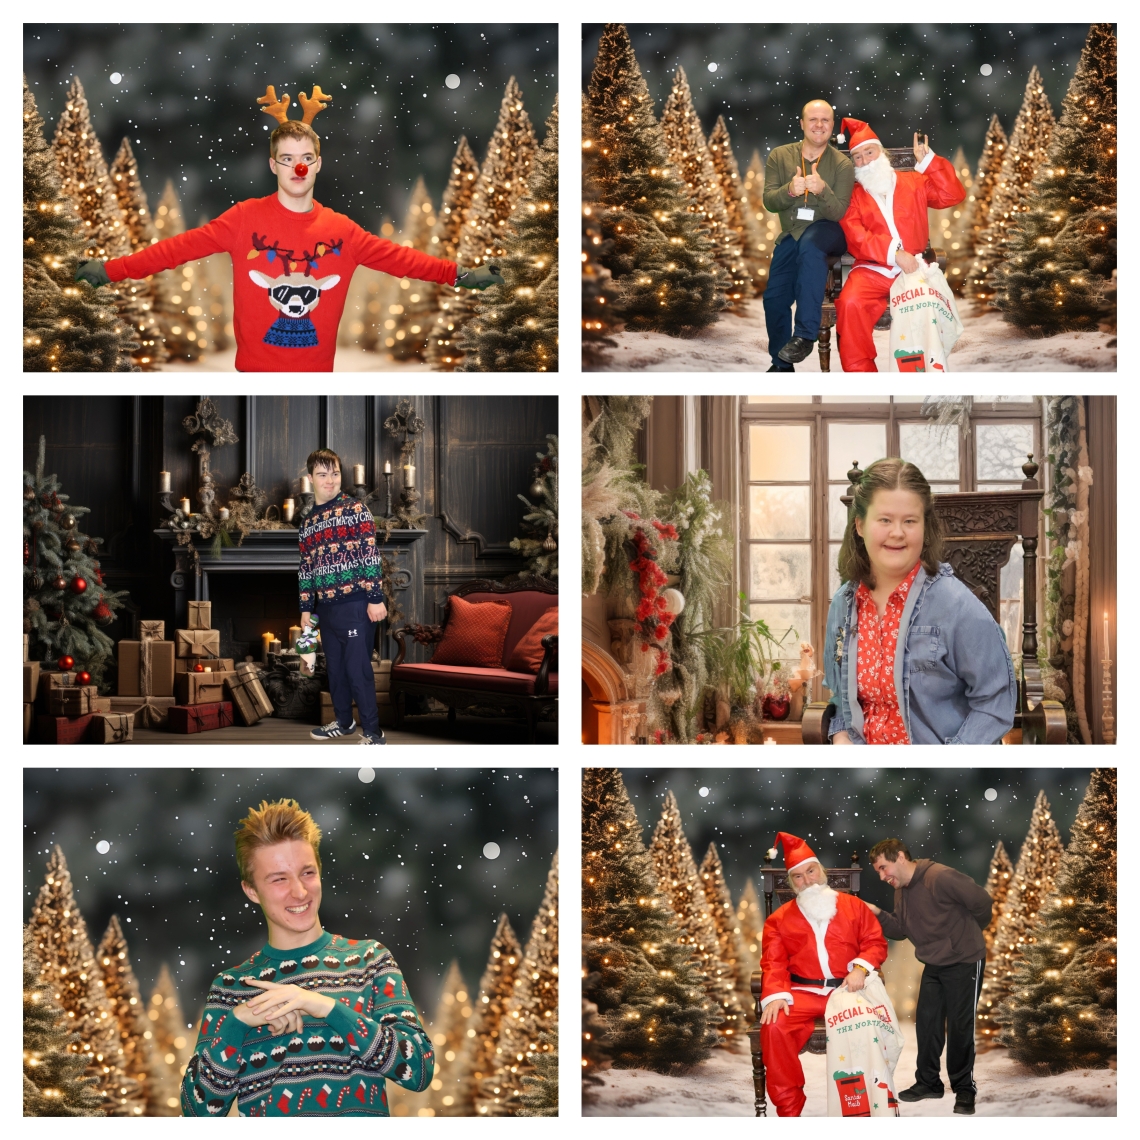 Green screen photos at Christmas party - collage